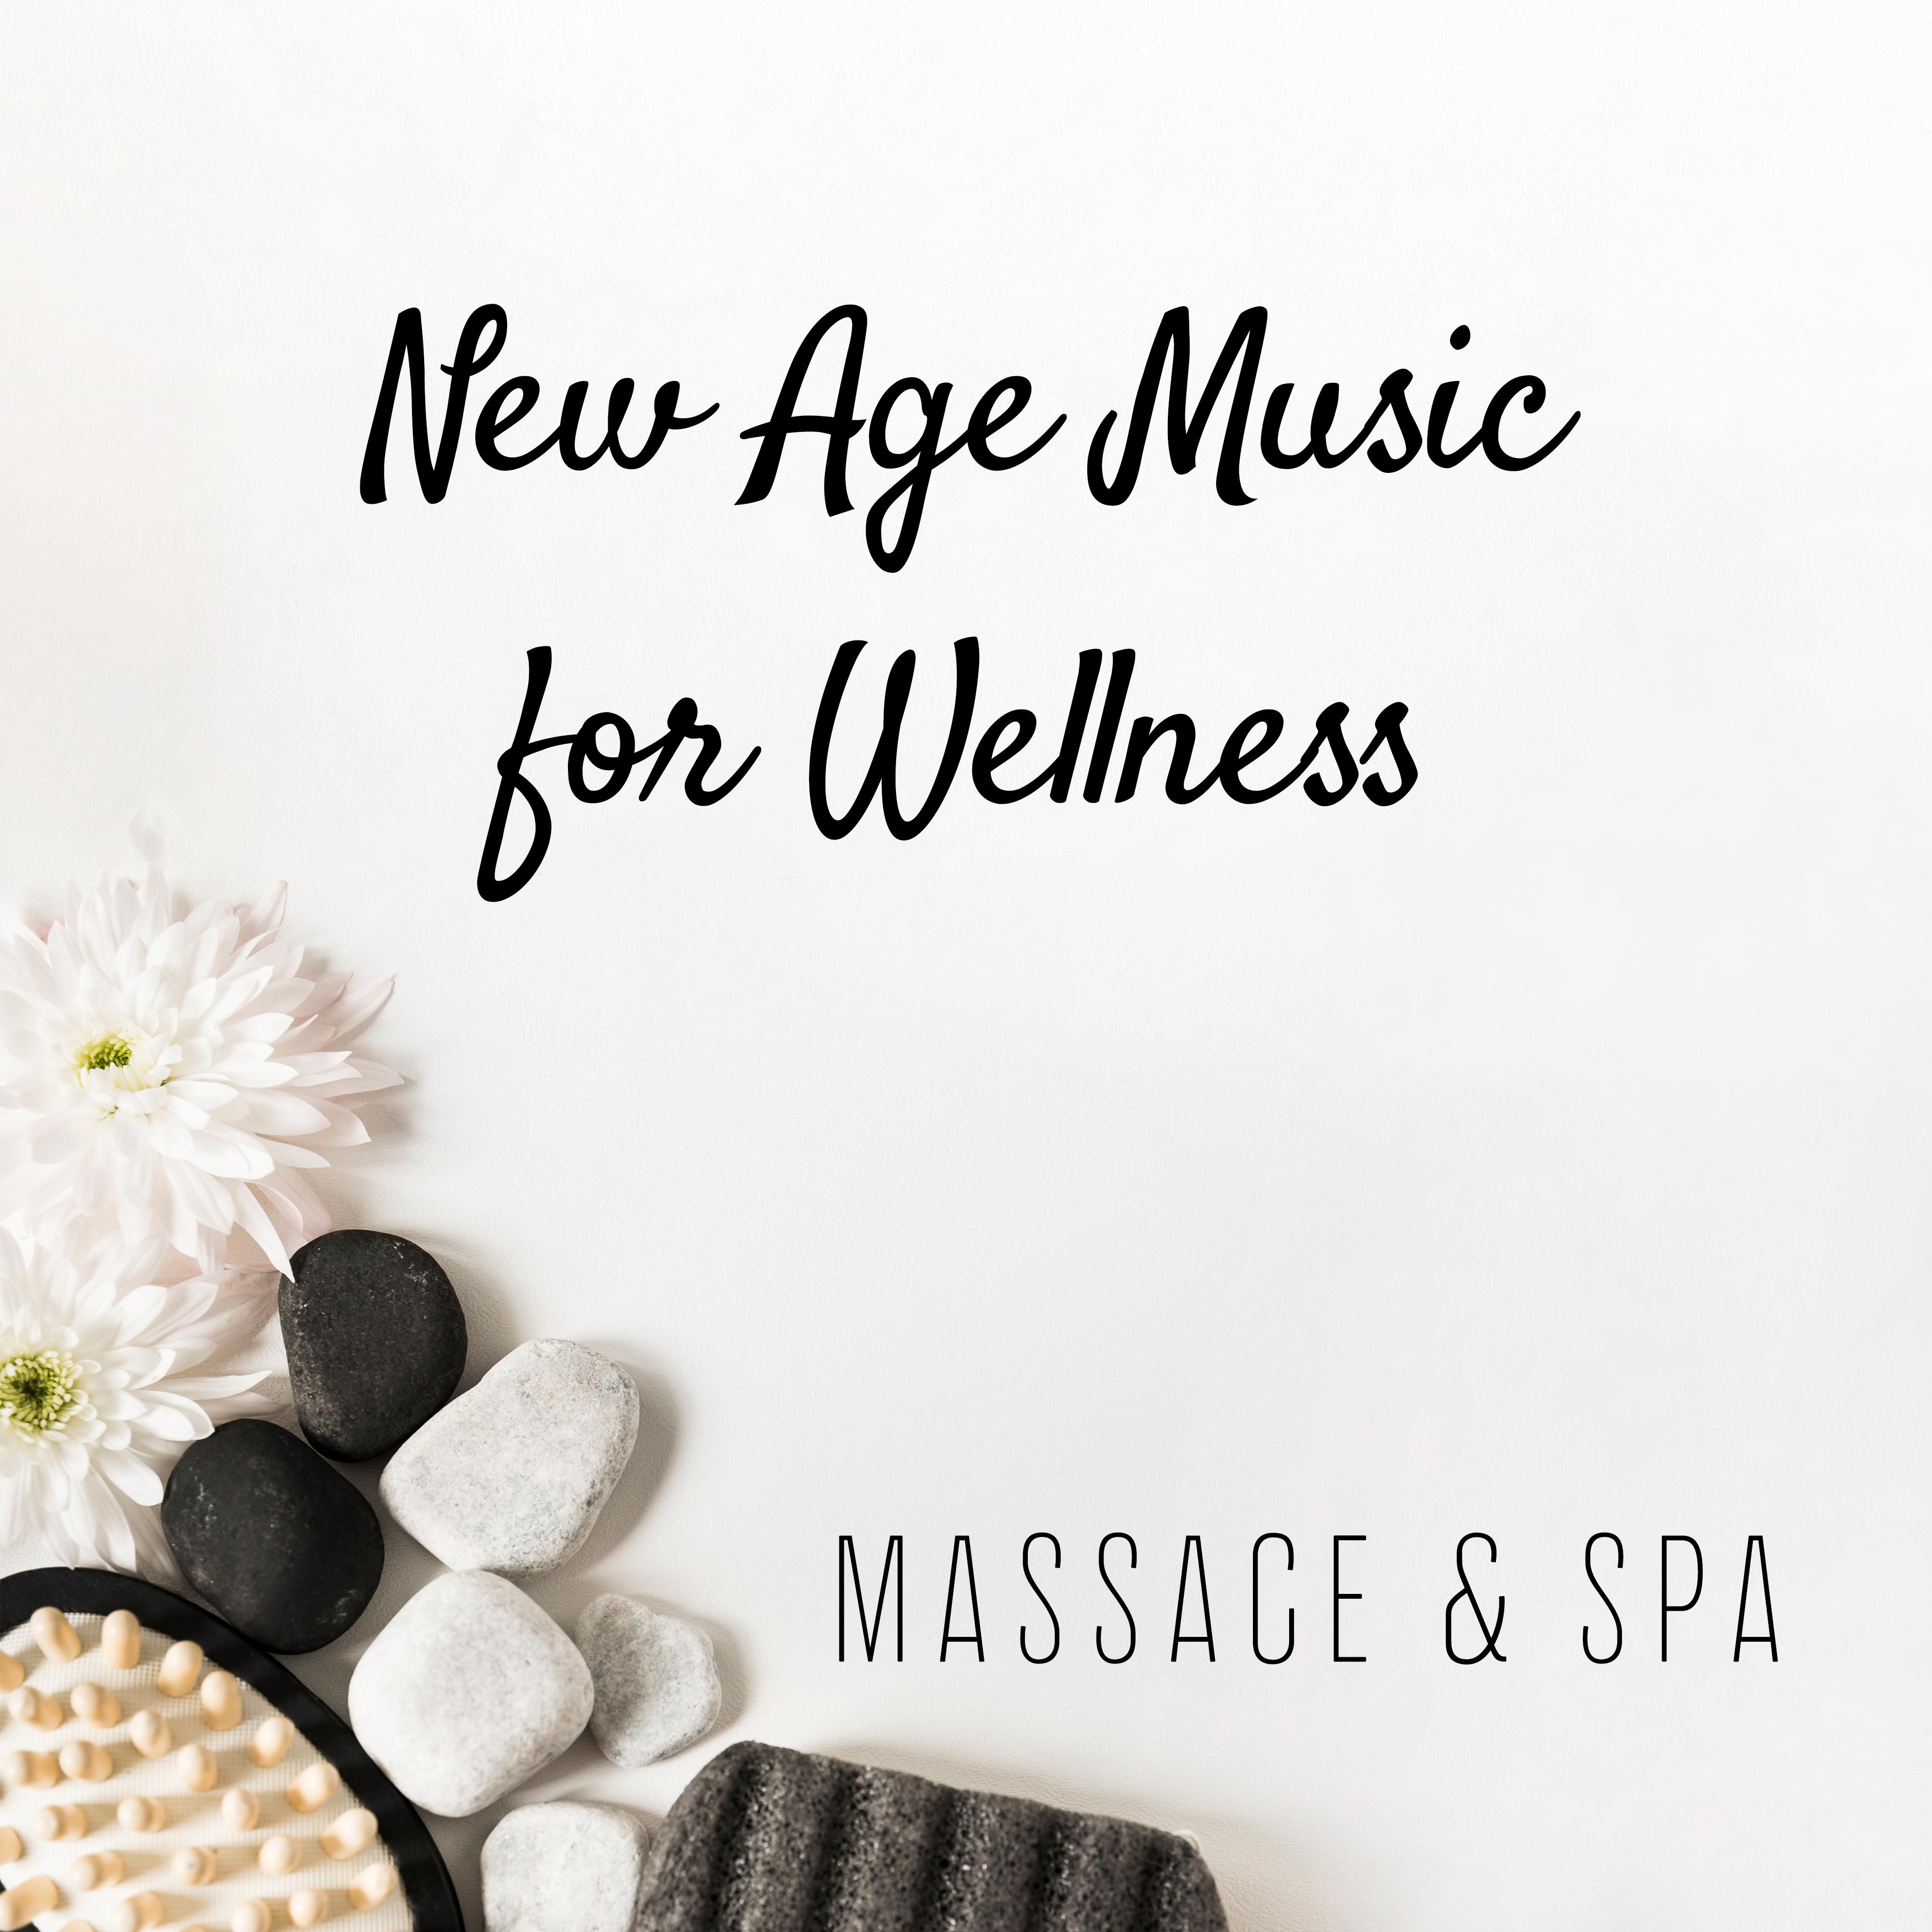 New Age Music for Wellness, Massage & Spa